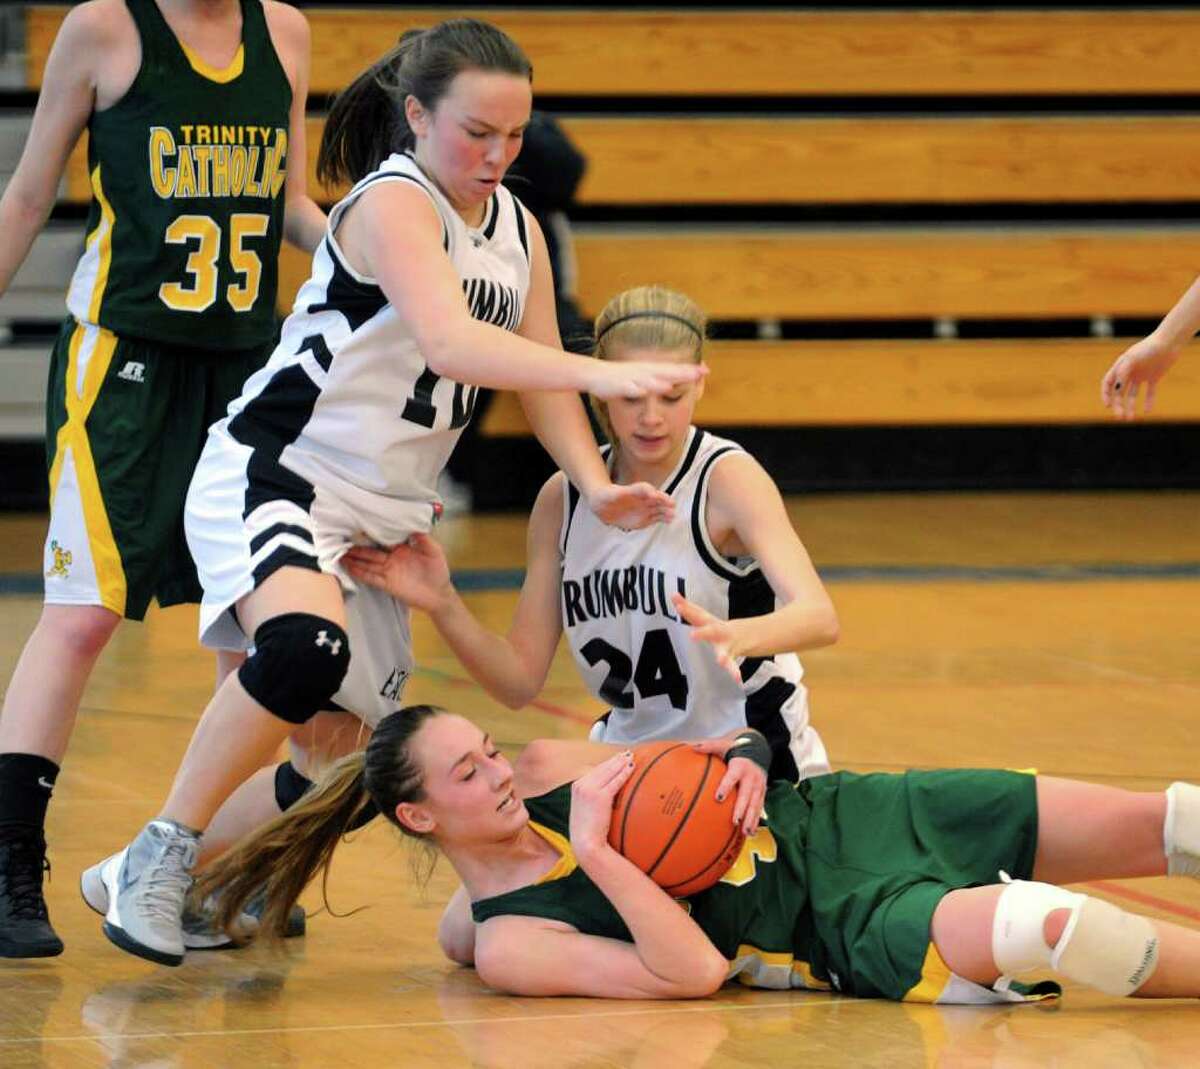 Trinity Catholic's #42 Mackenzie Griffin looks to hold onto the ball as Trumbull's #10 Kate O'Leary, left, and #24 Amanda Pfohl converge to grab it, during FCIAC Girls Basketball Quarterfinal action in Fairfield, Conn. on Saturday February 18, 2012.